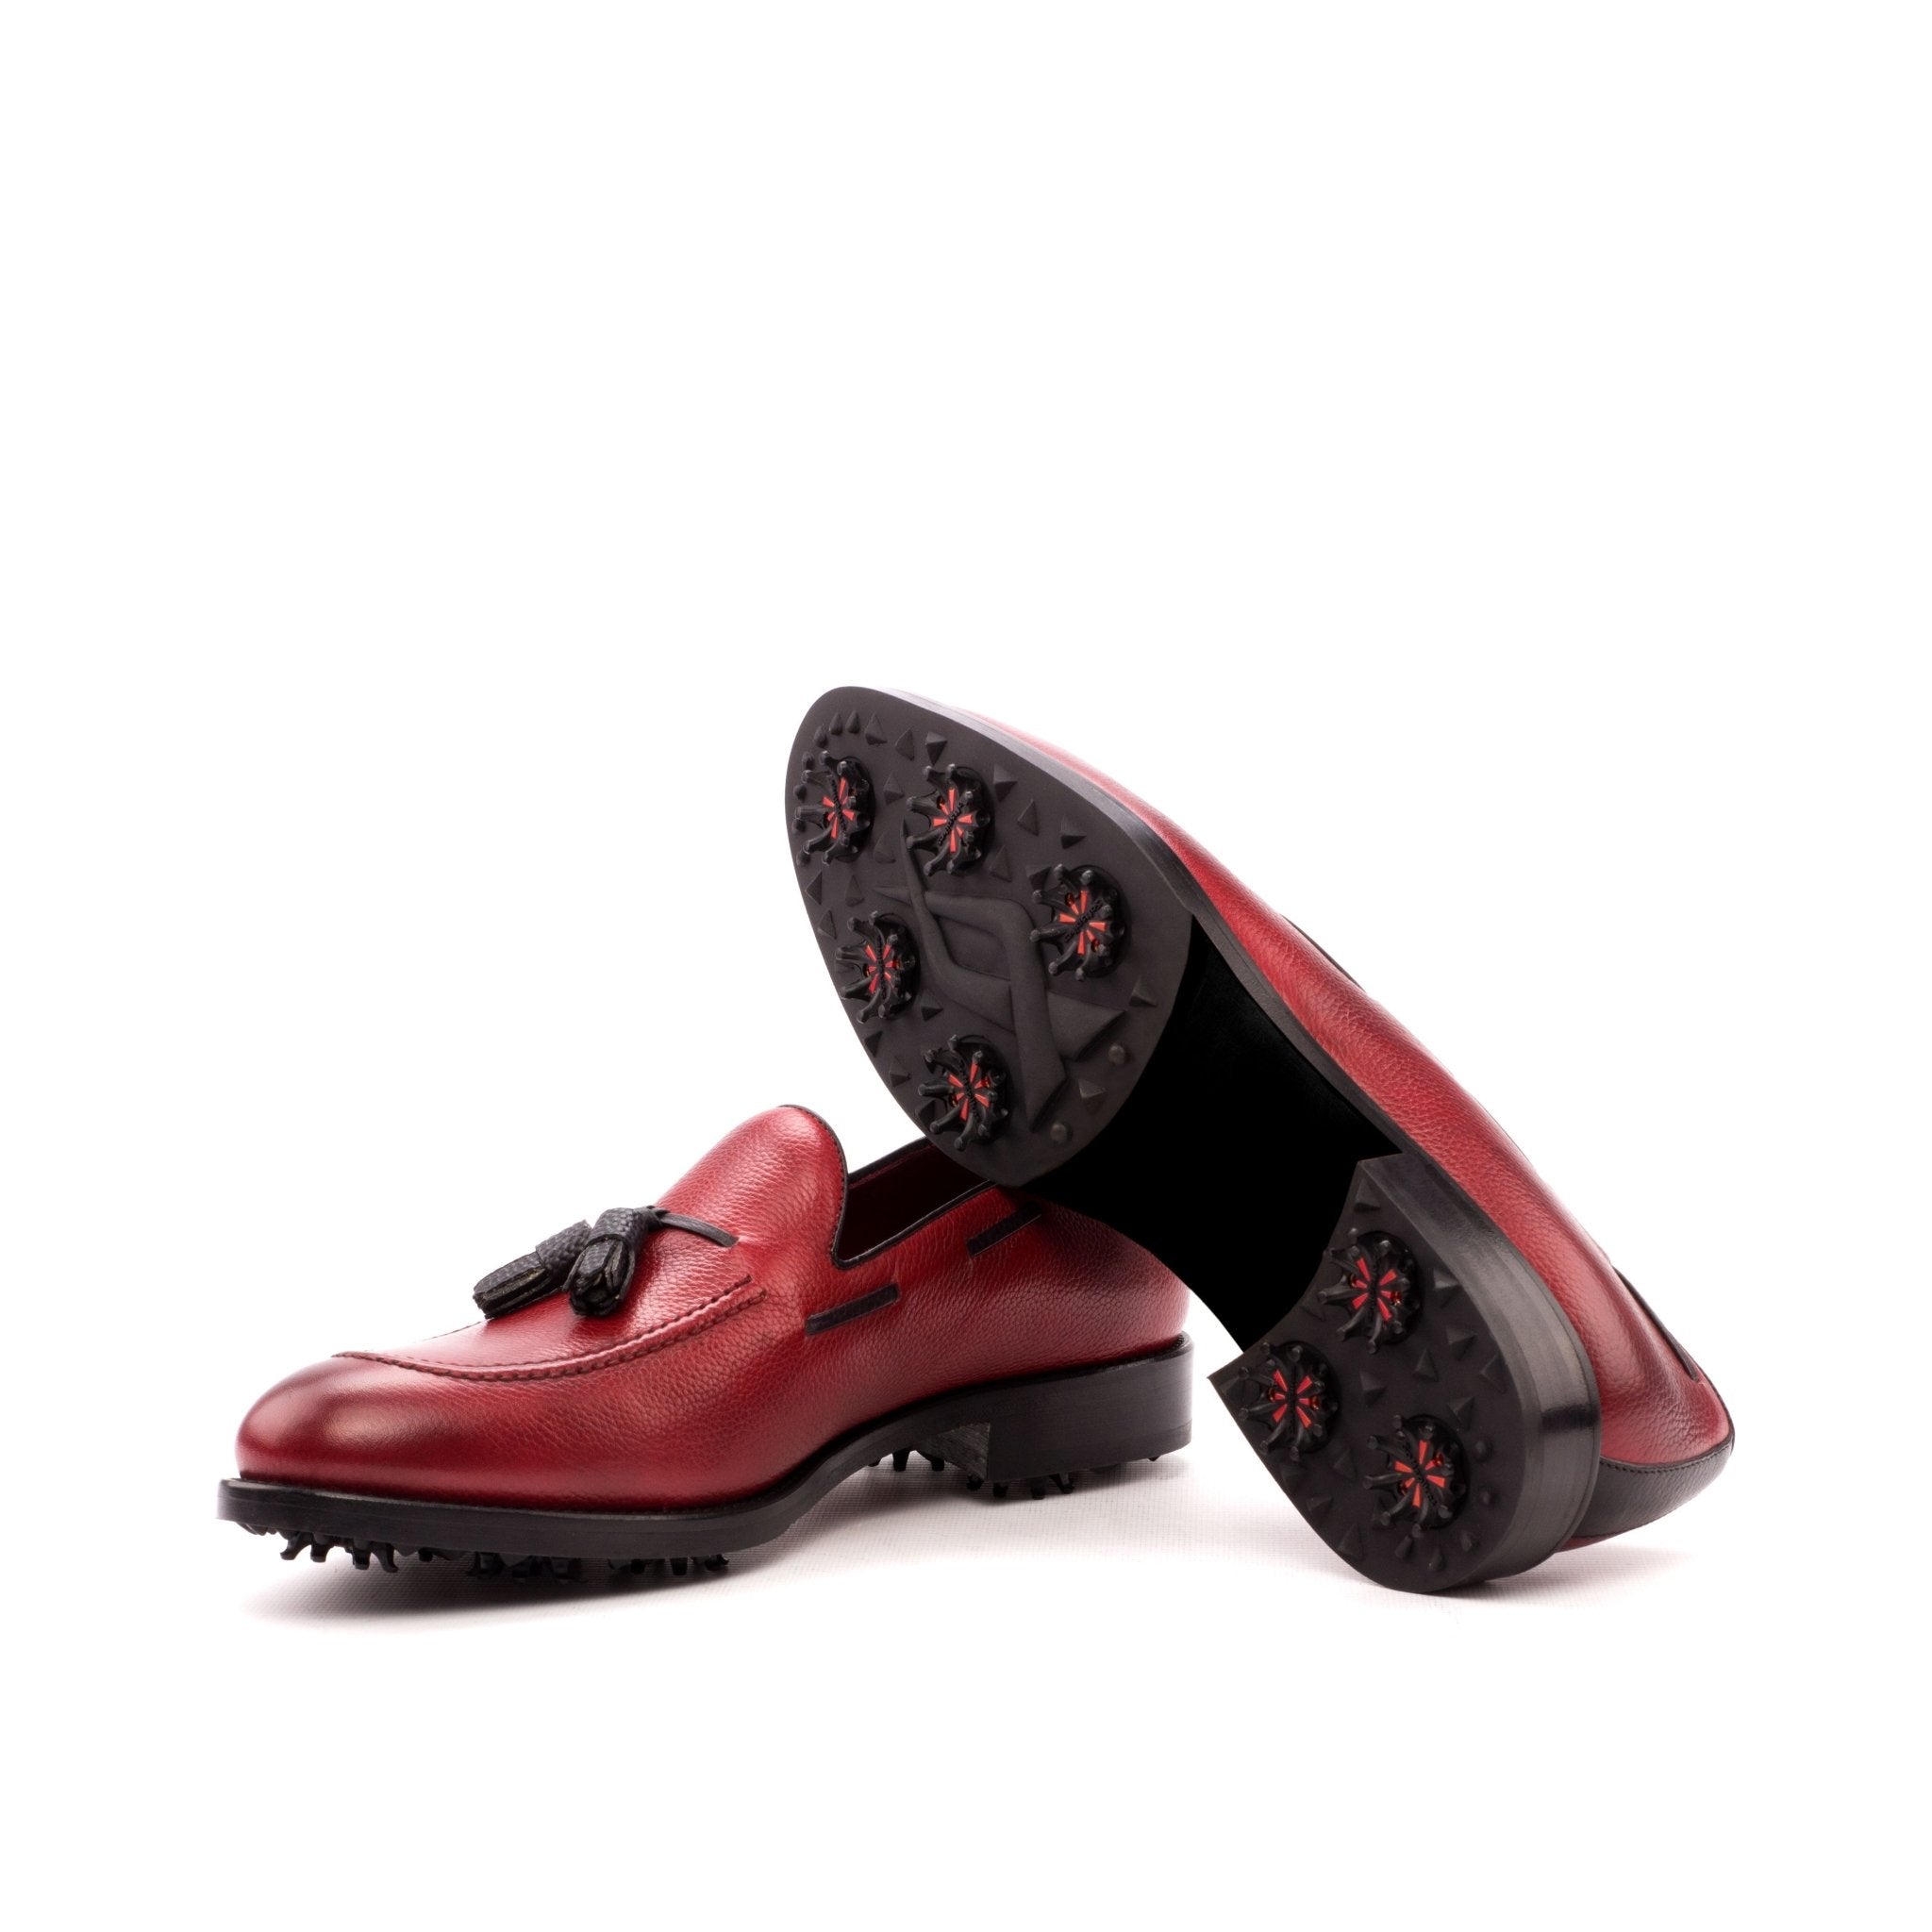 Men's Full Grain Golf Loafers in Red and Black by Maison Kingsley - Maison Kingsley Couture Spain